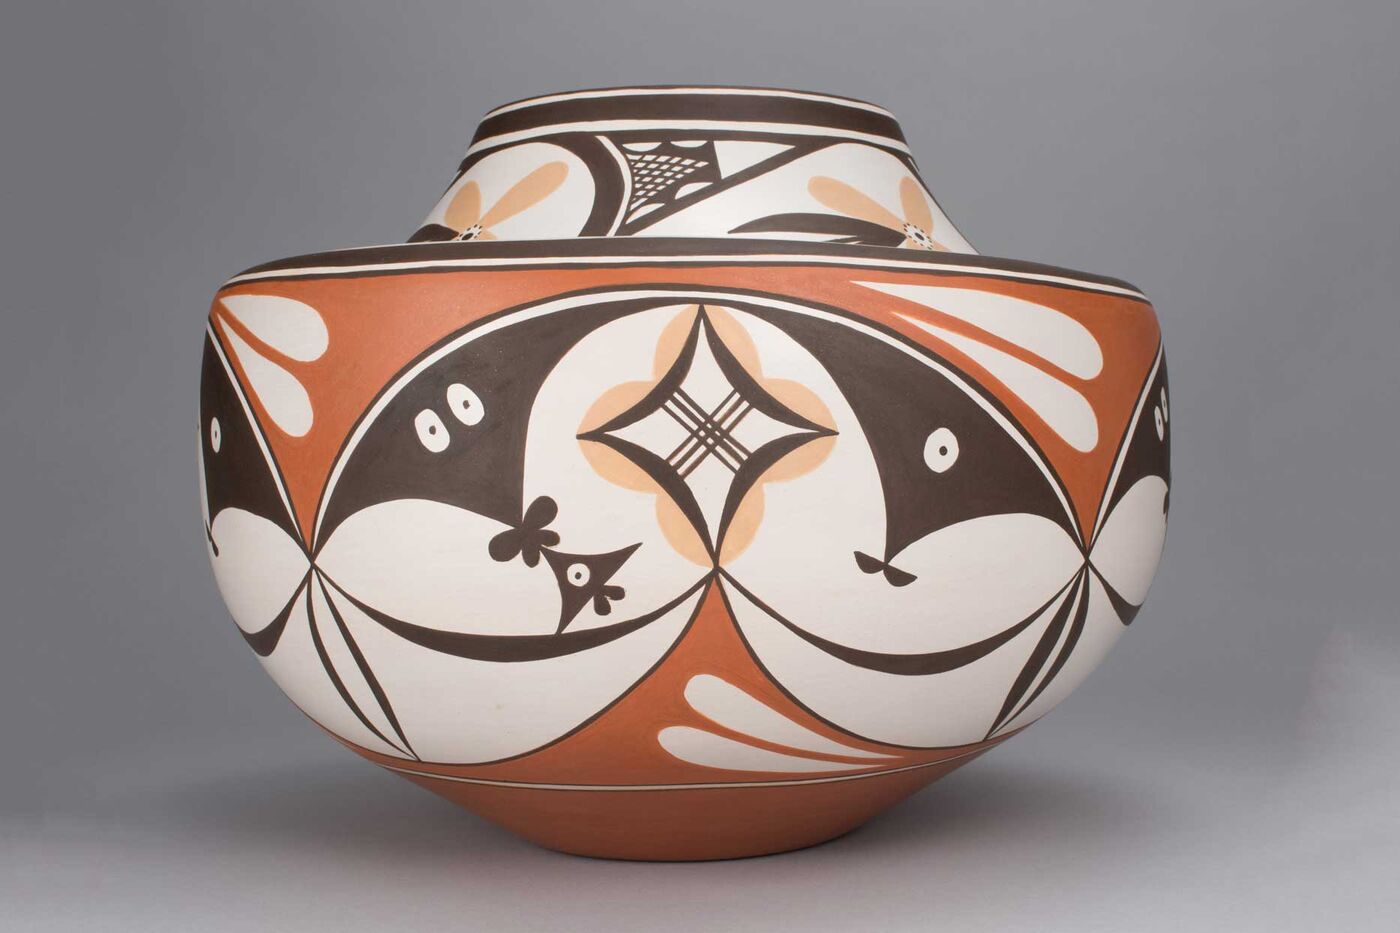 A pot with orange, brown, and yellow designs.